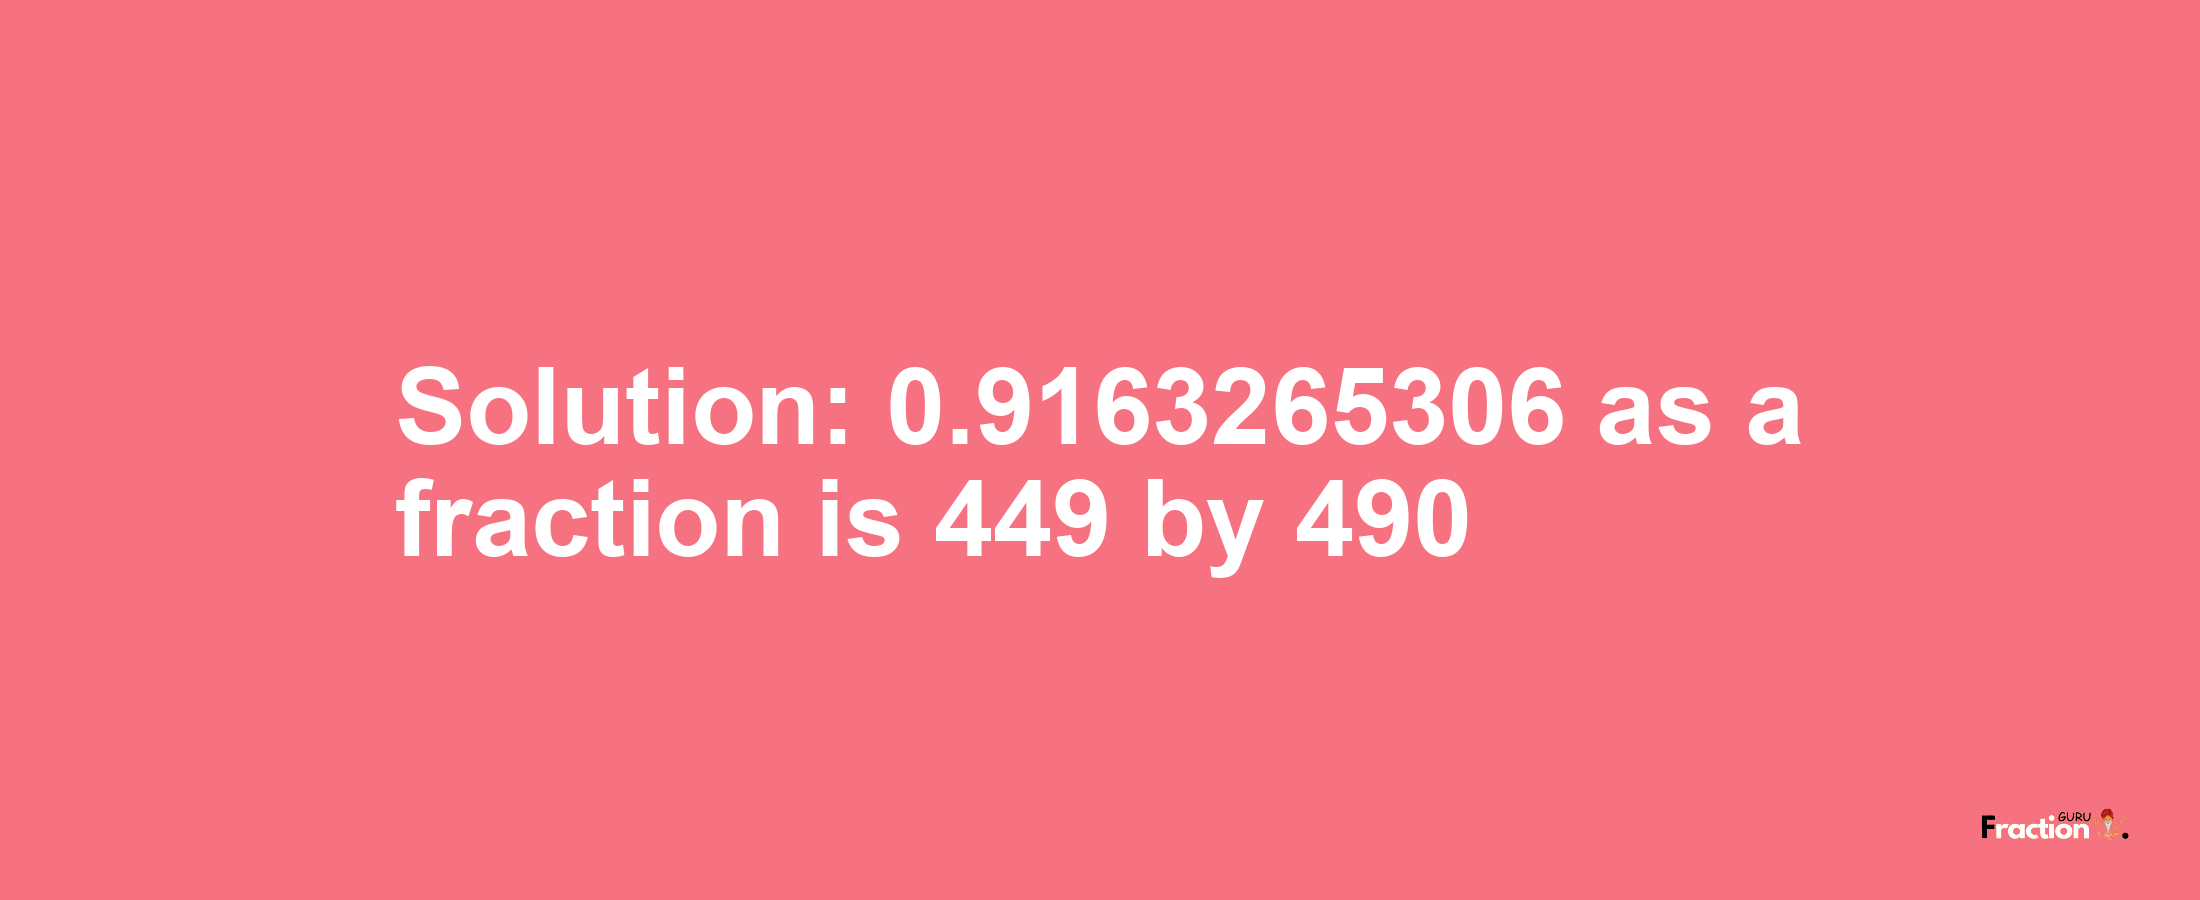 Solution:0.9163265306 as a fraction is 449/490